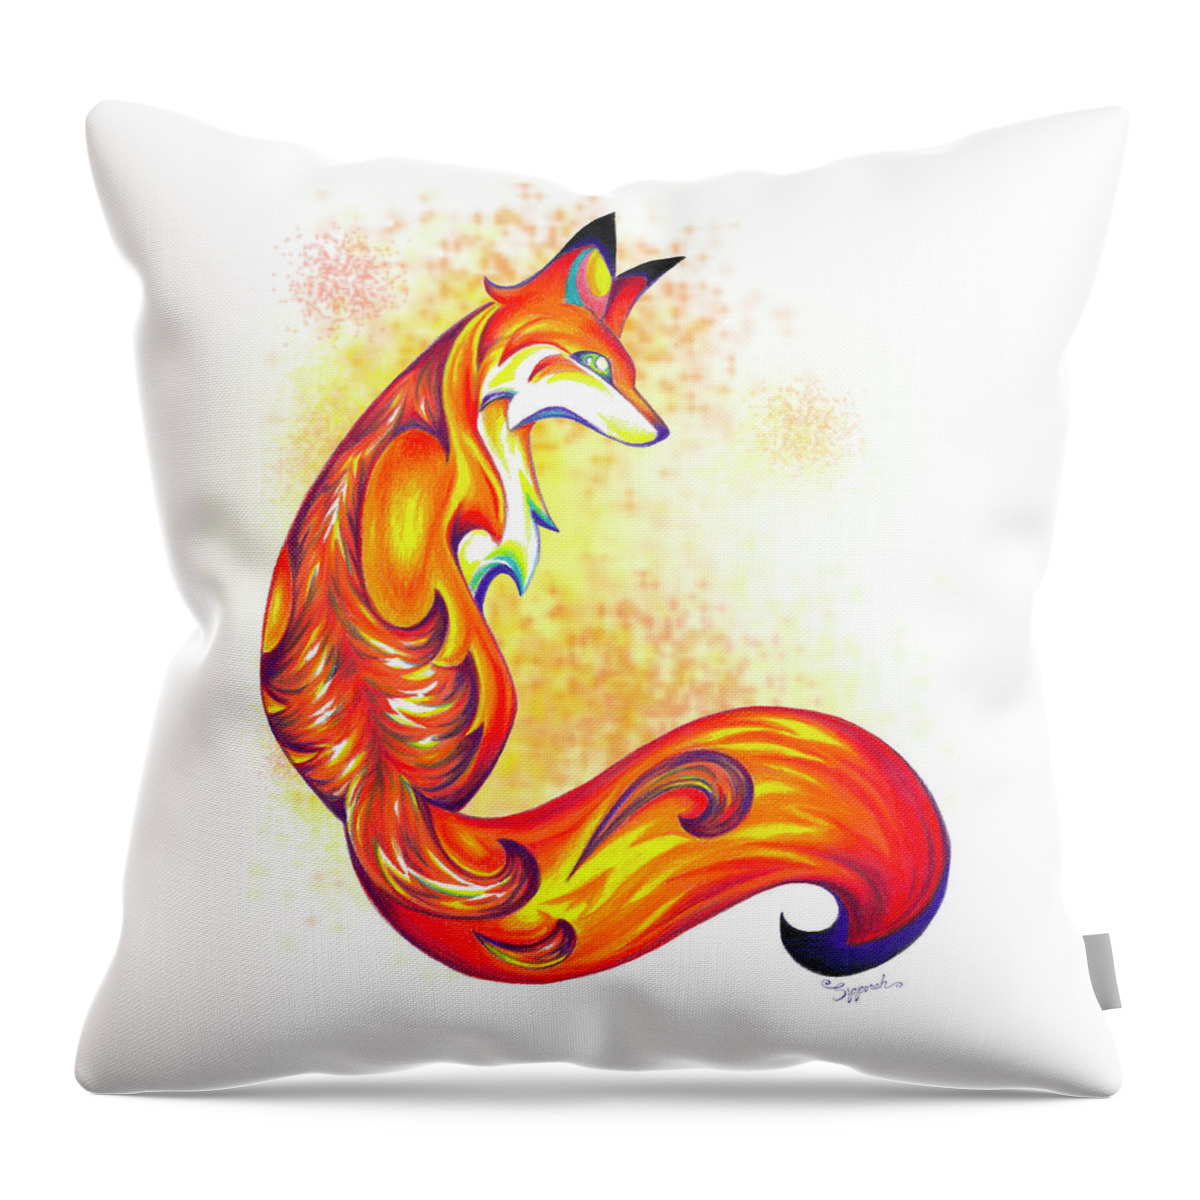 Fox Throw Pillow featuring the drawing Stylized Fox I by Sipporah Art and Illustration